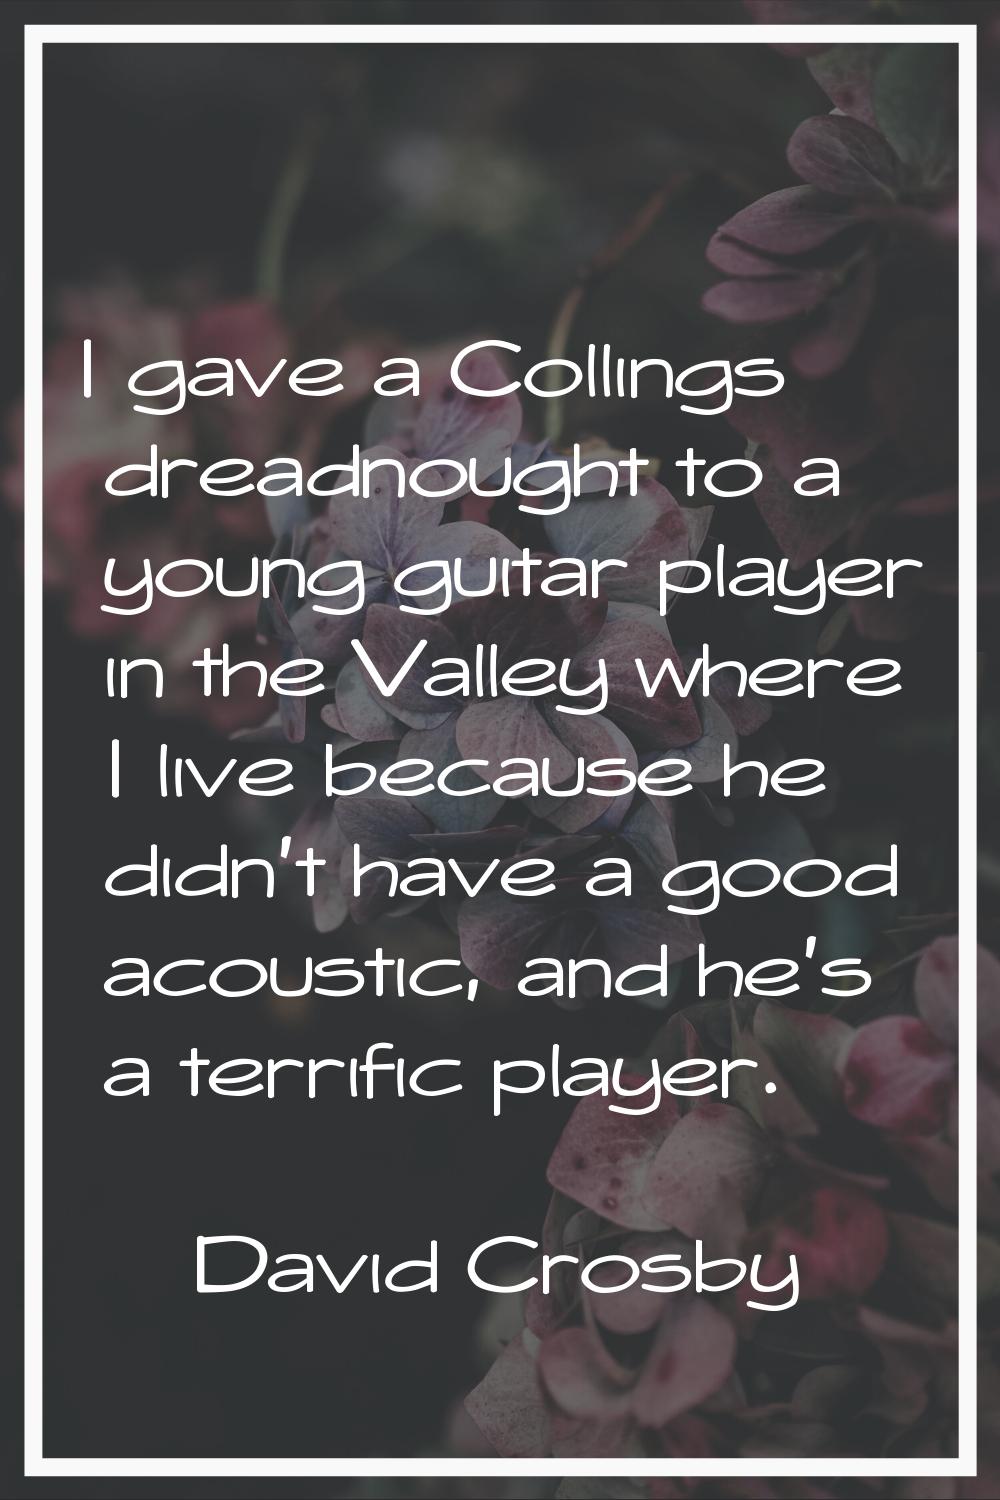 I gave a Collings dreadnought to a young guitar player in the Valley where I live because he didn't